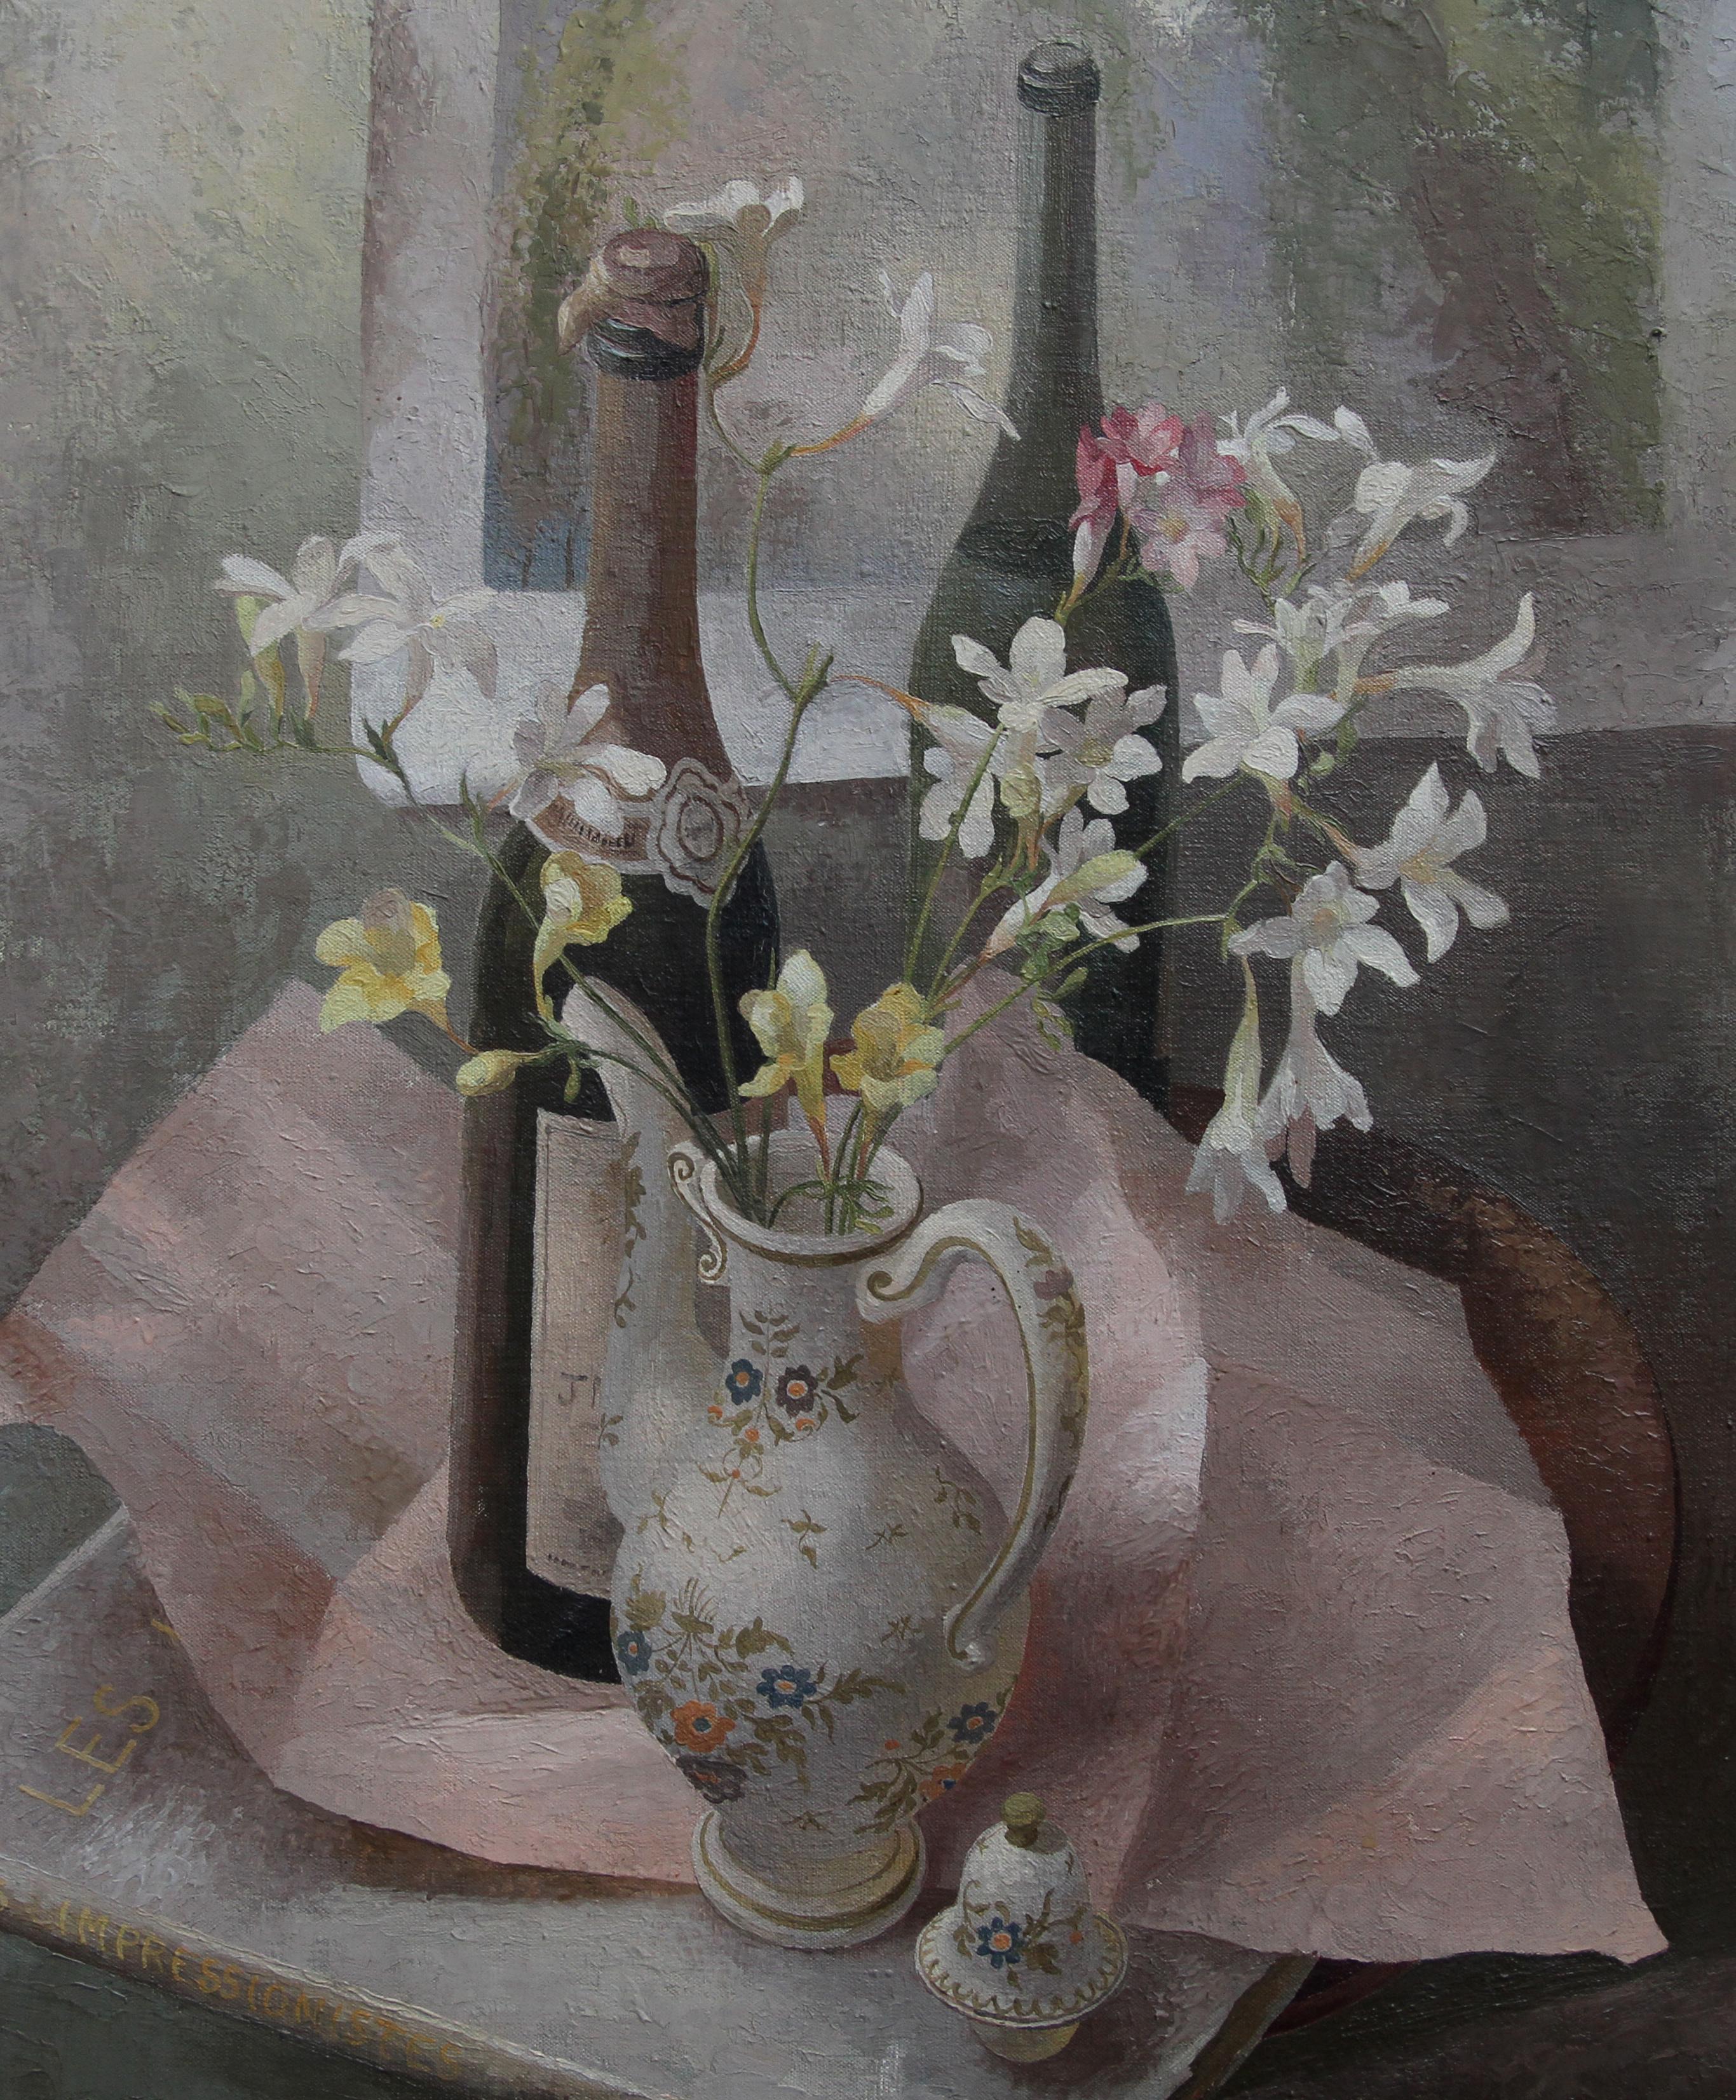 French Coffee Pot - British exh art 1960s floral still life oil painting flowers - Realist Painting by Mary Kent Harrison